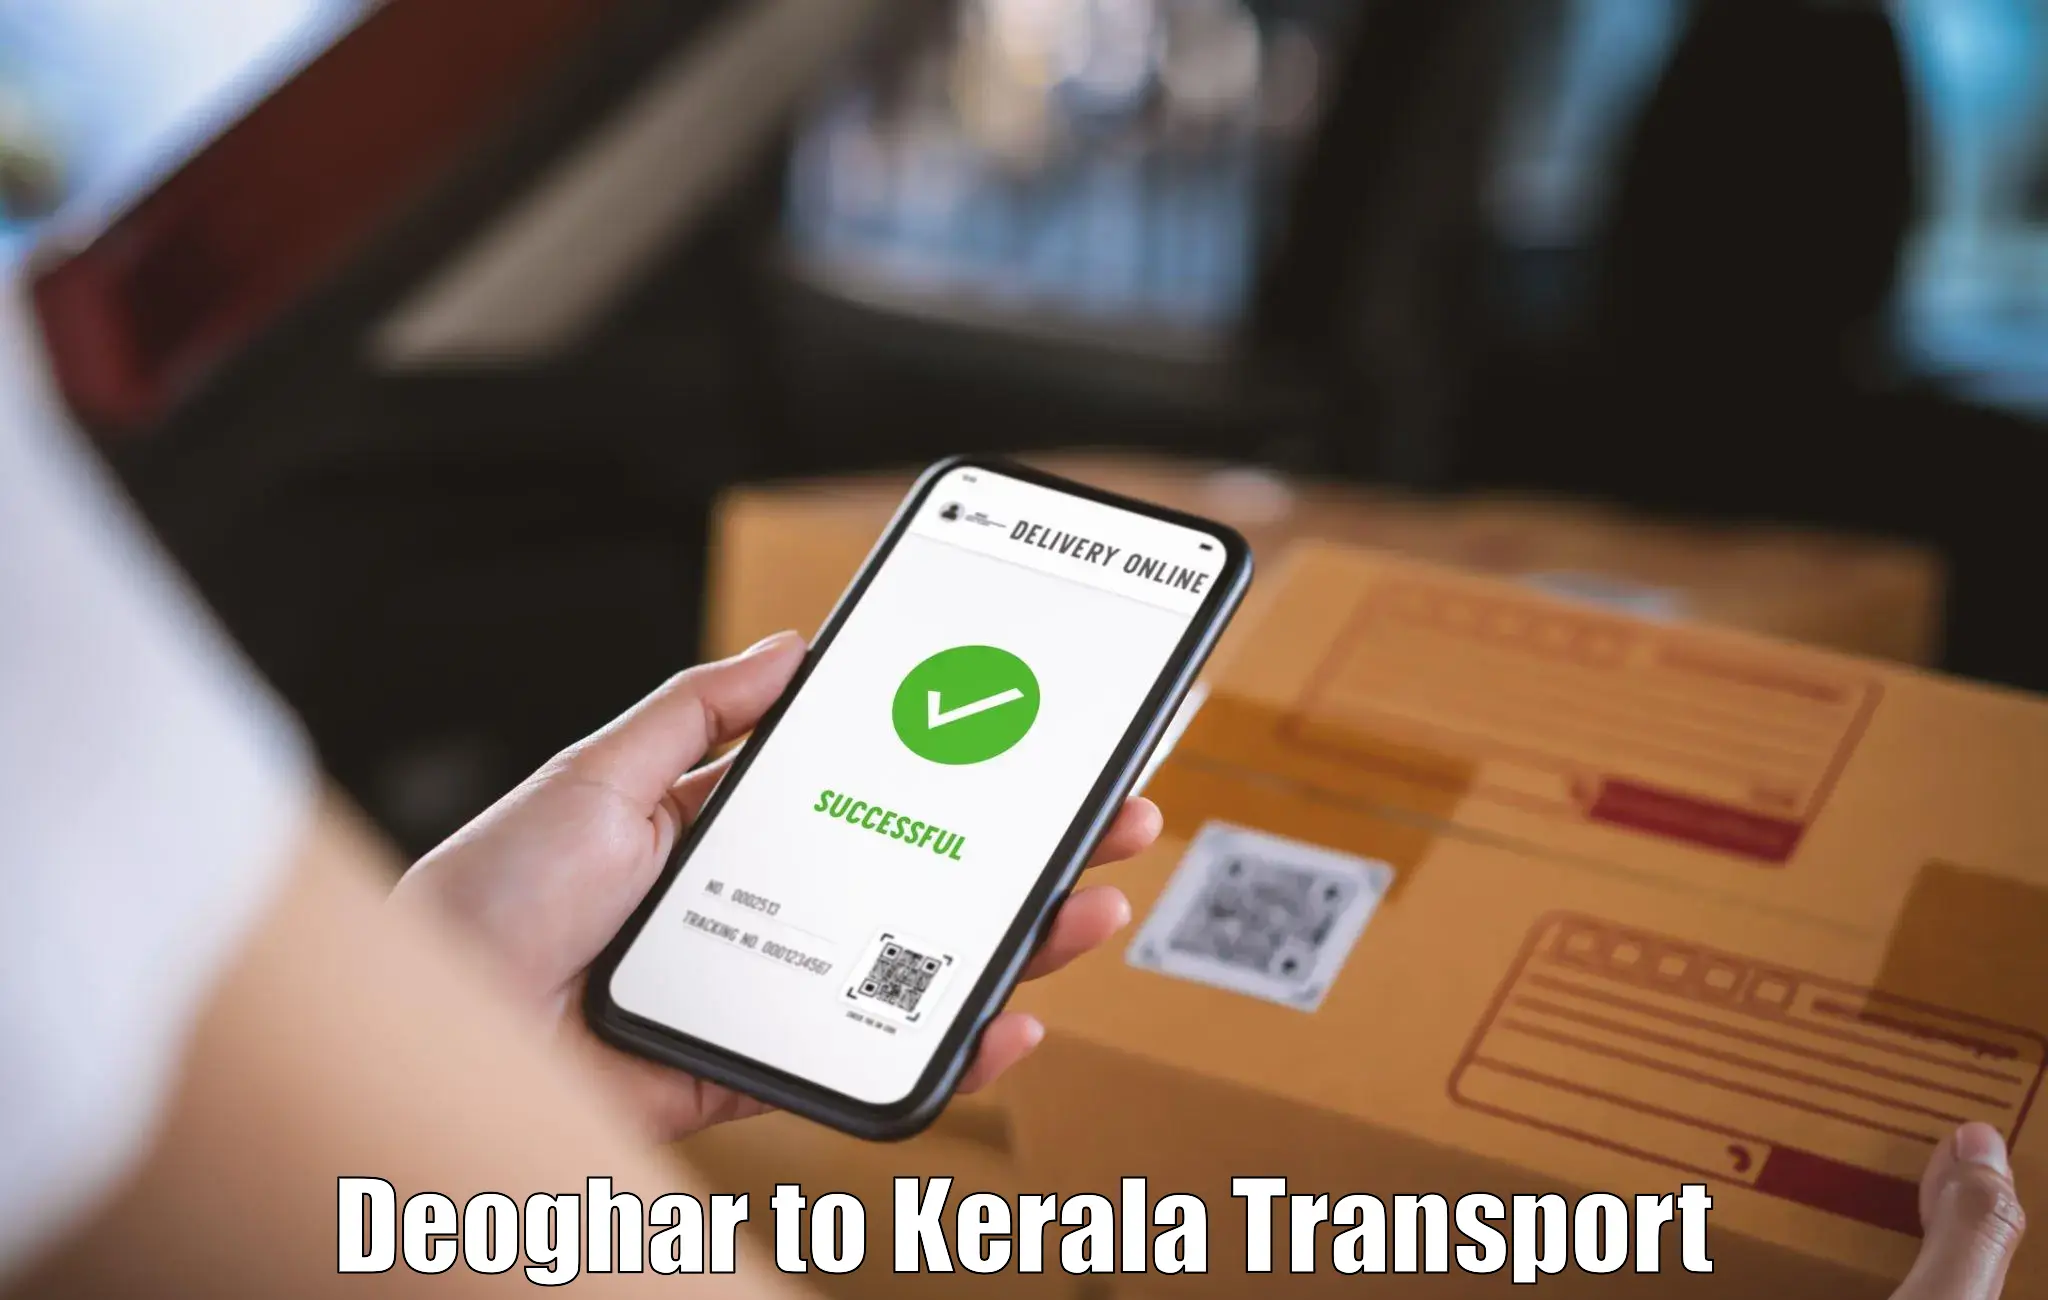 Road transport services Deoghar to Kochi